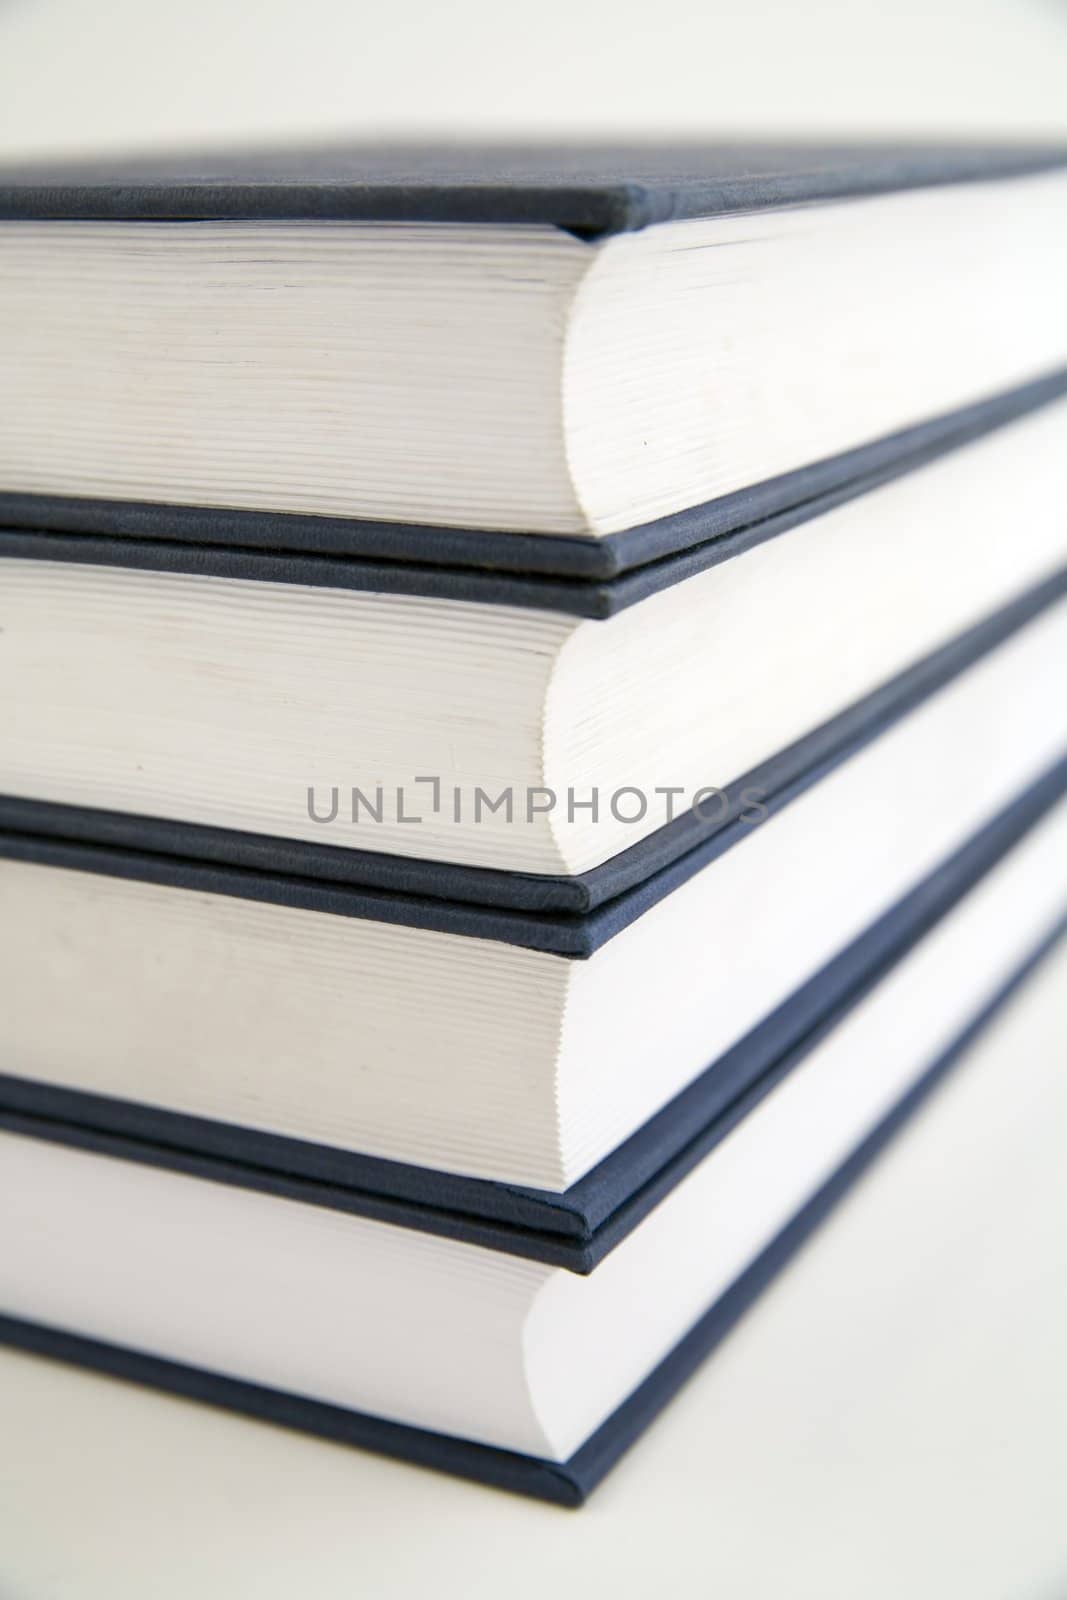 stack of books on the white background